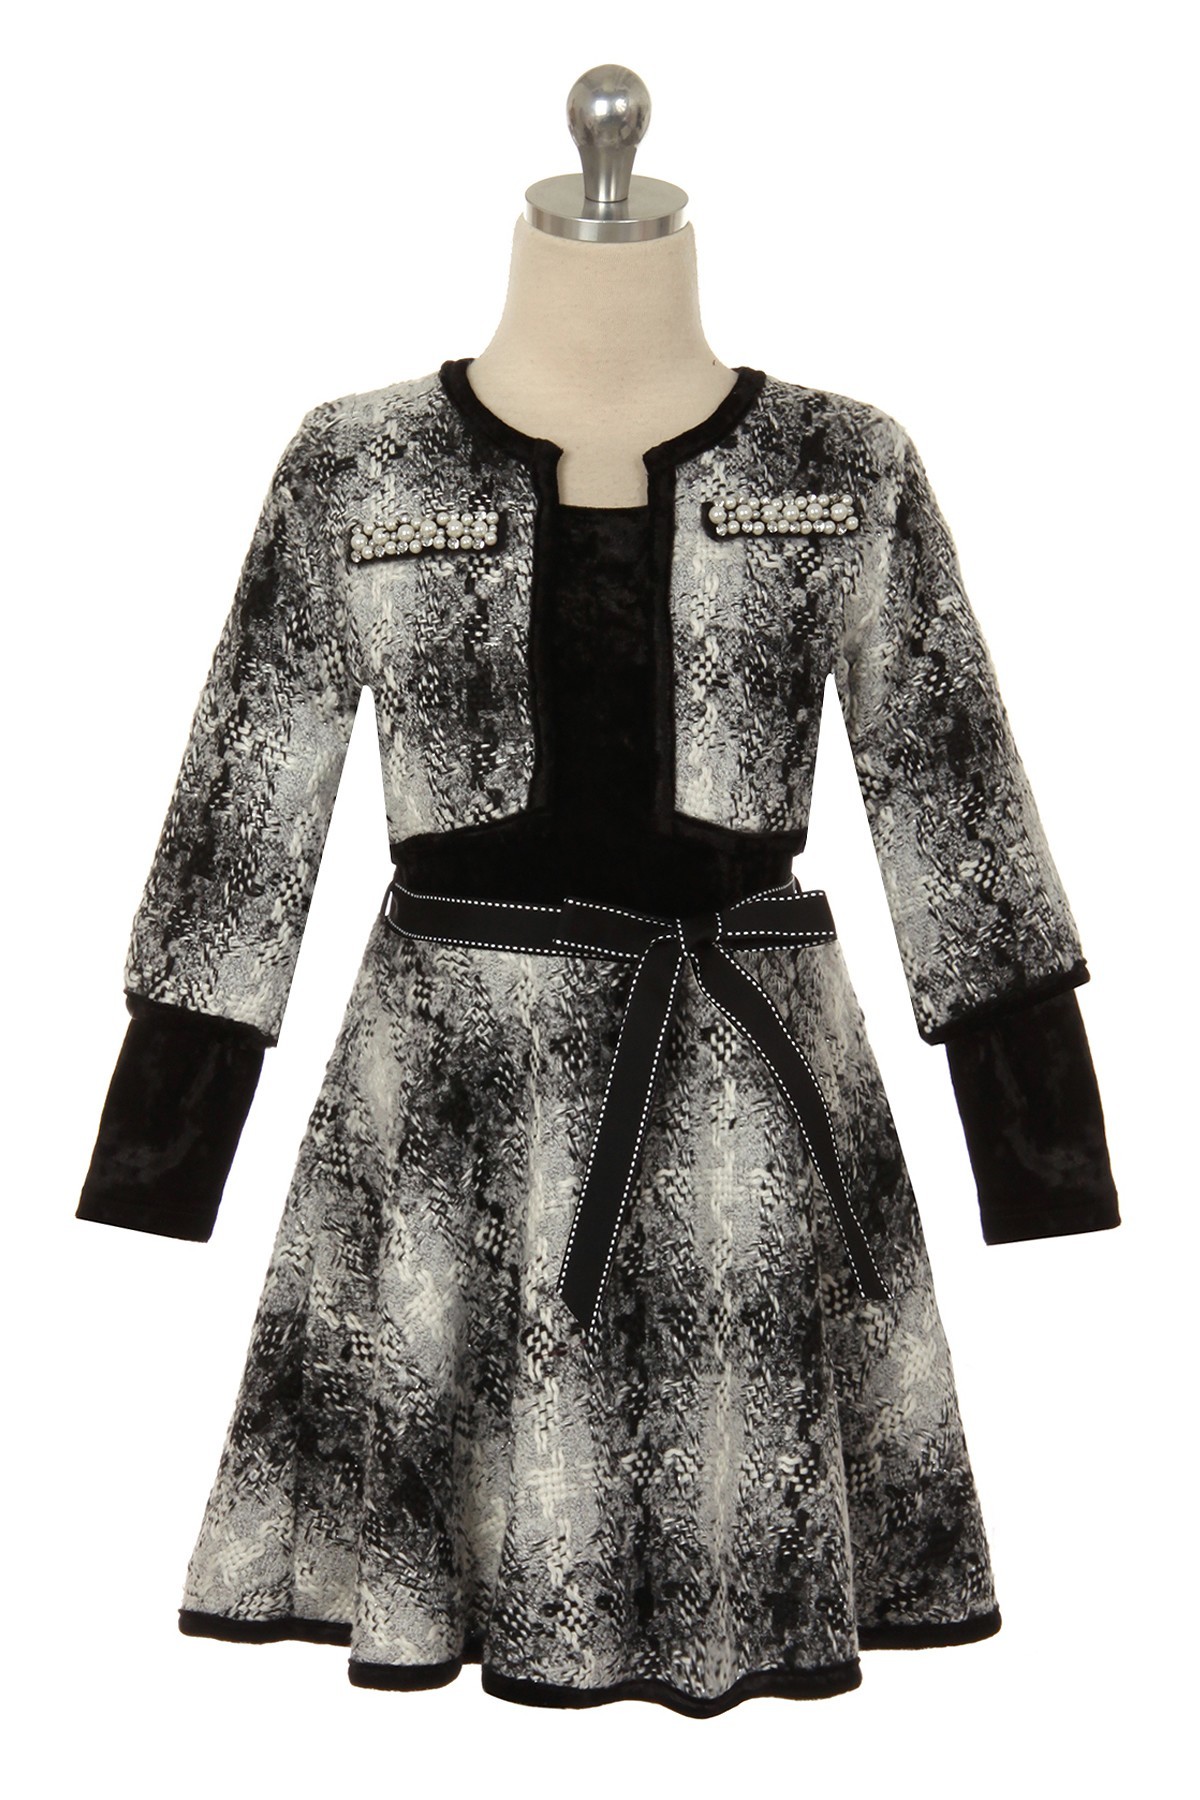 dress for winter in this black and white plaid skirt & jacket dress with velvet top